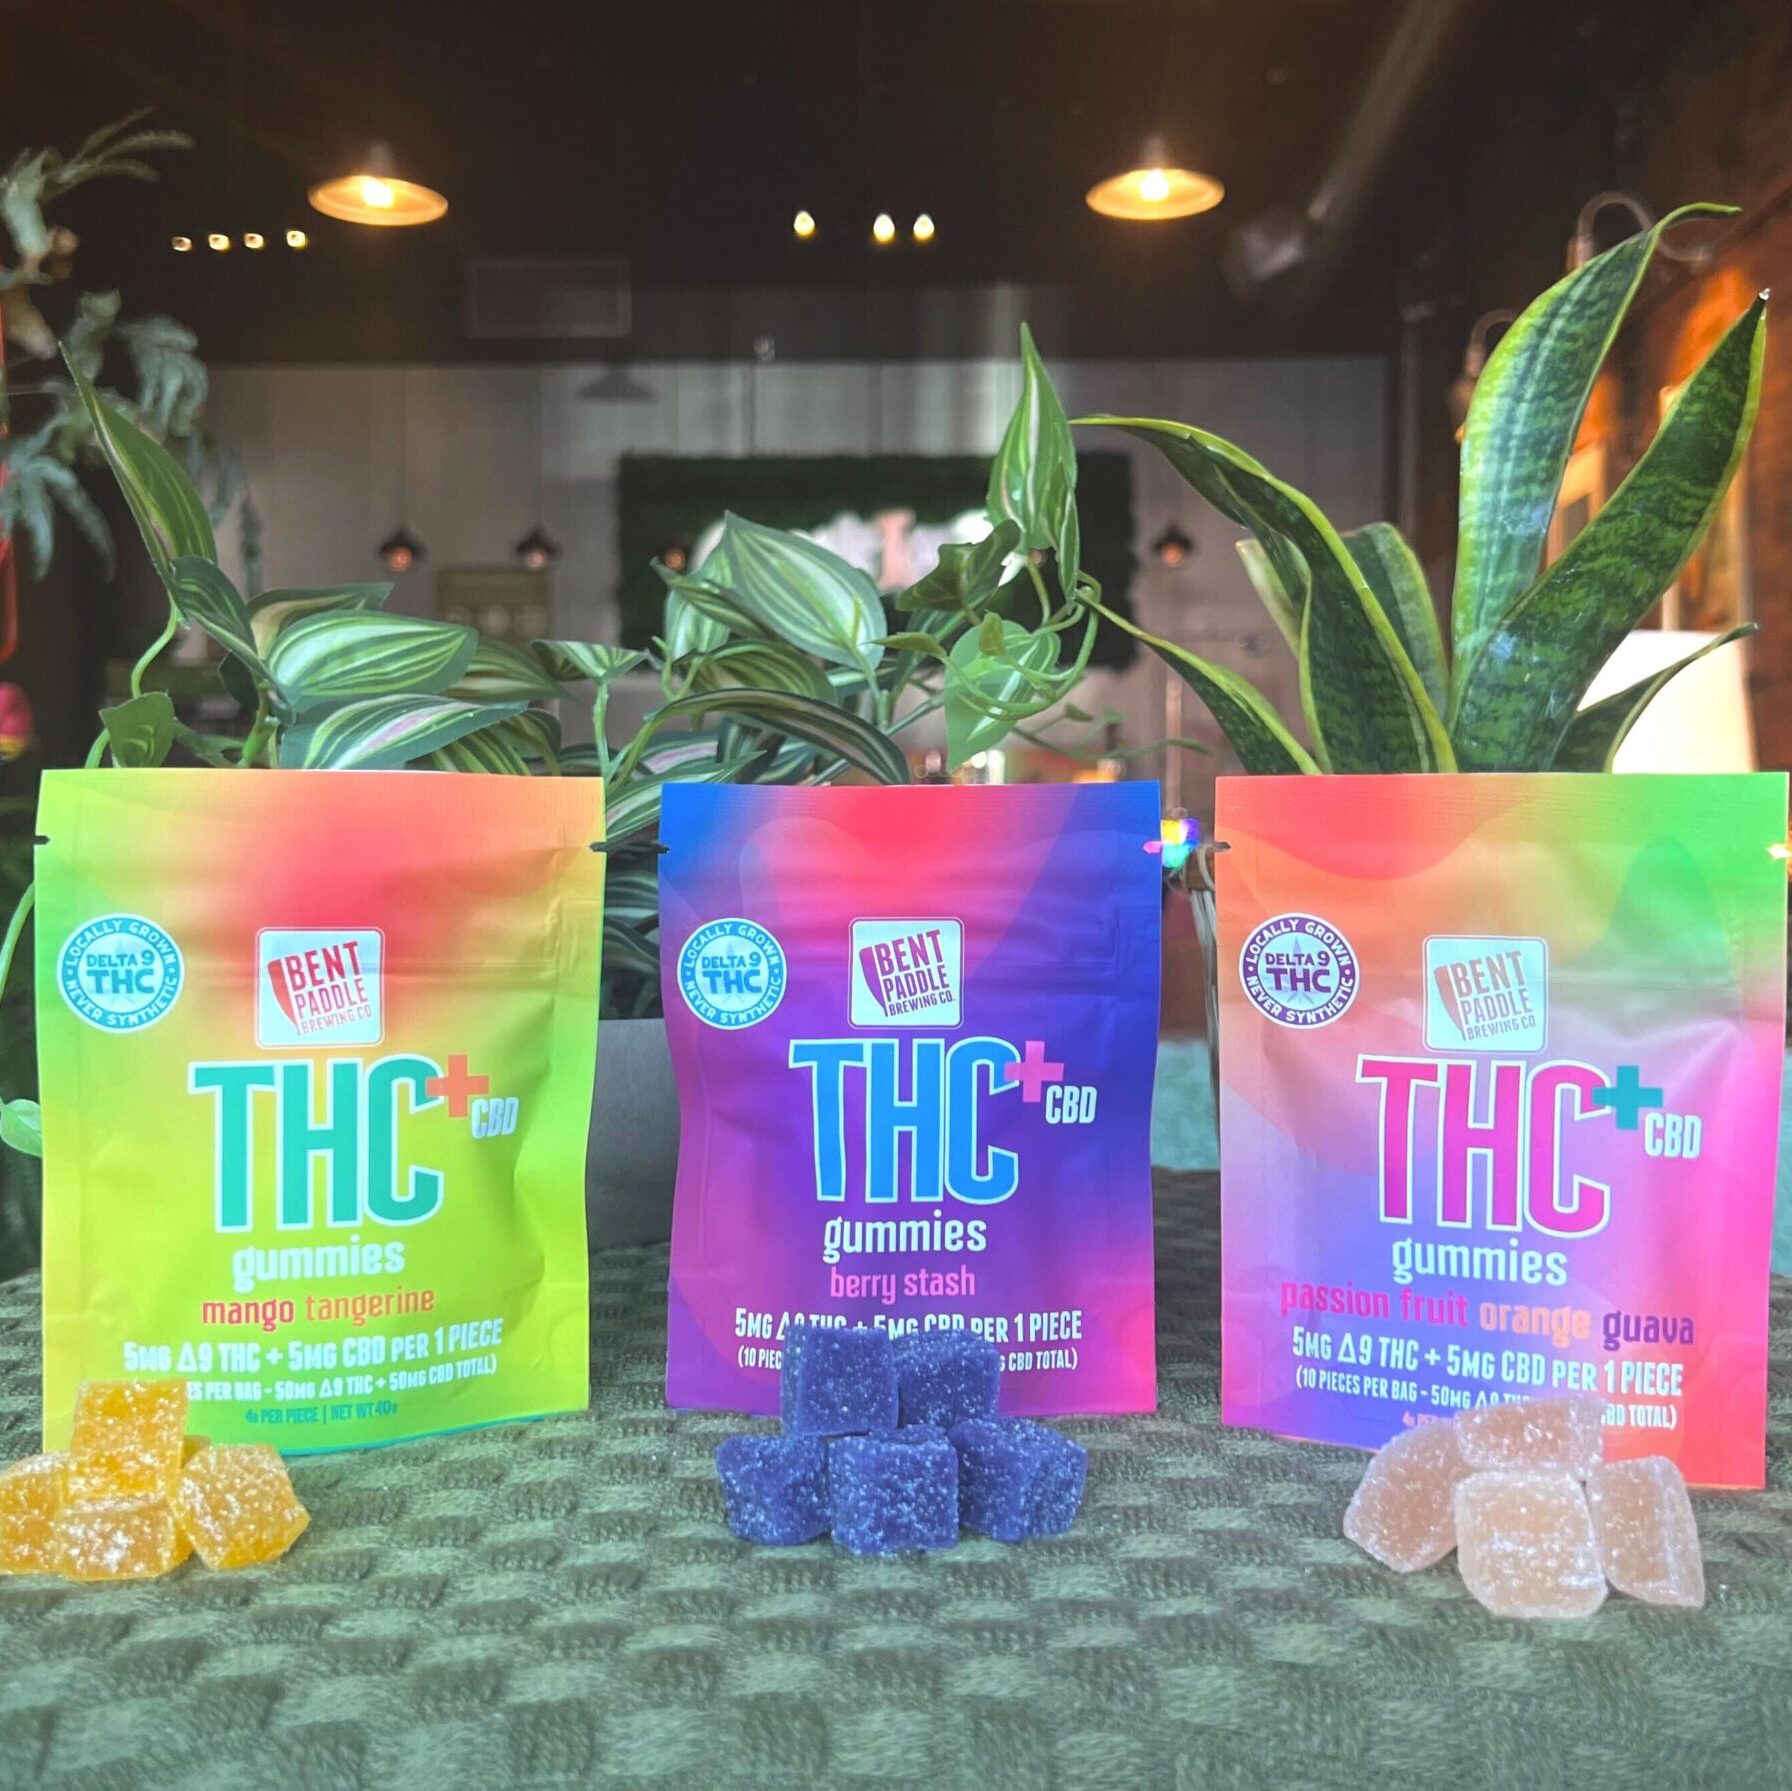 Bent Paddle THC Gummies - ship to you!